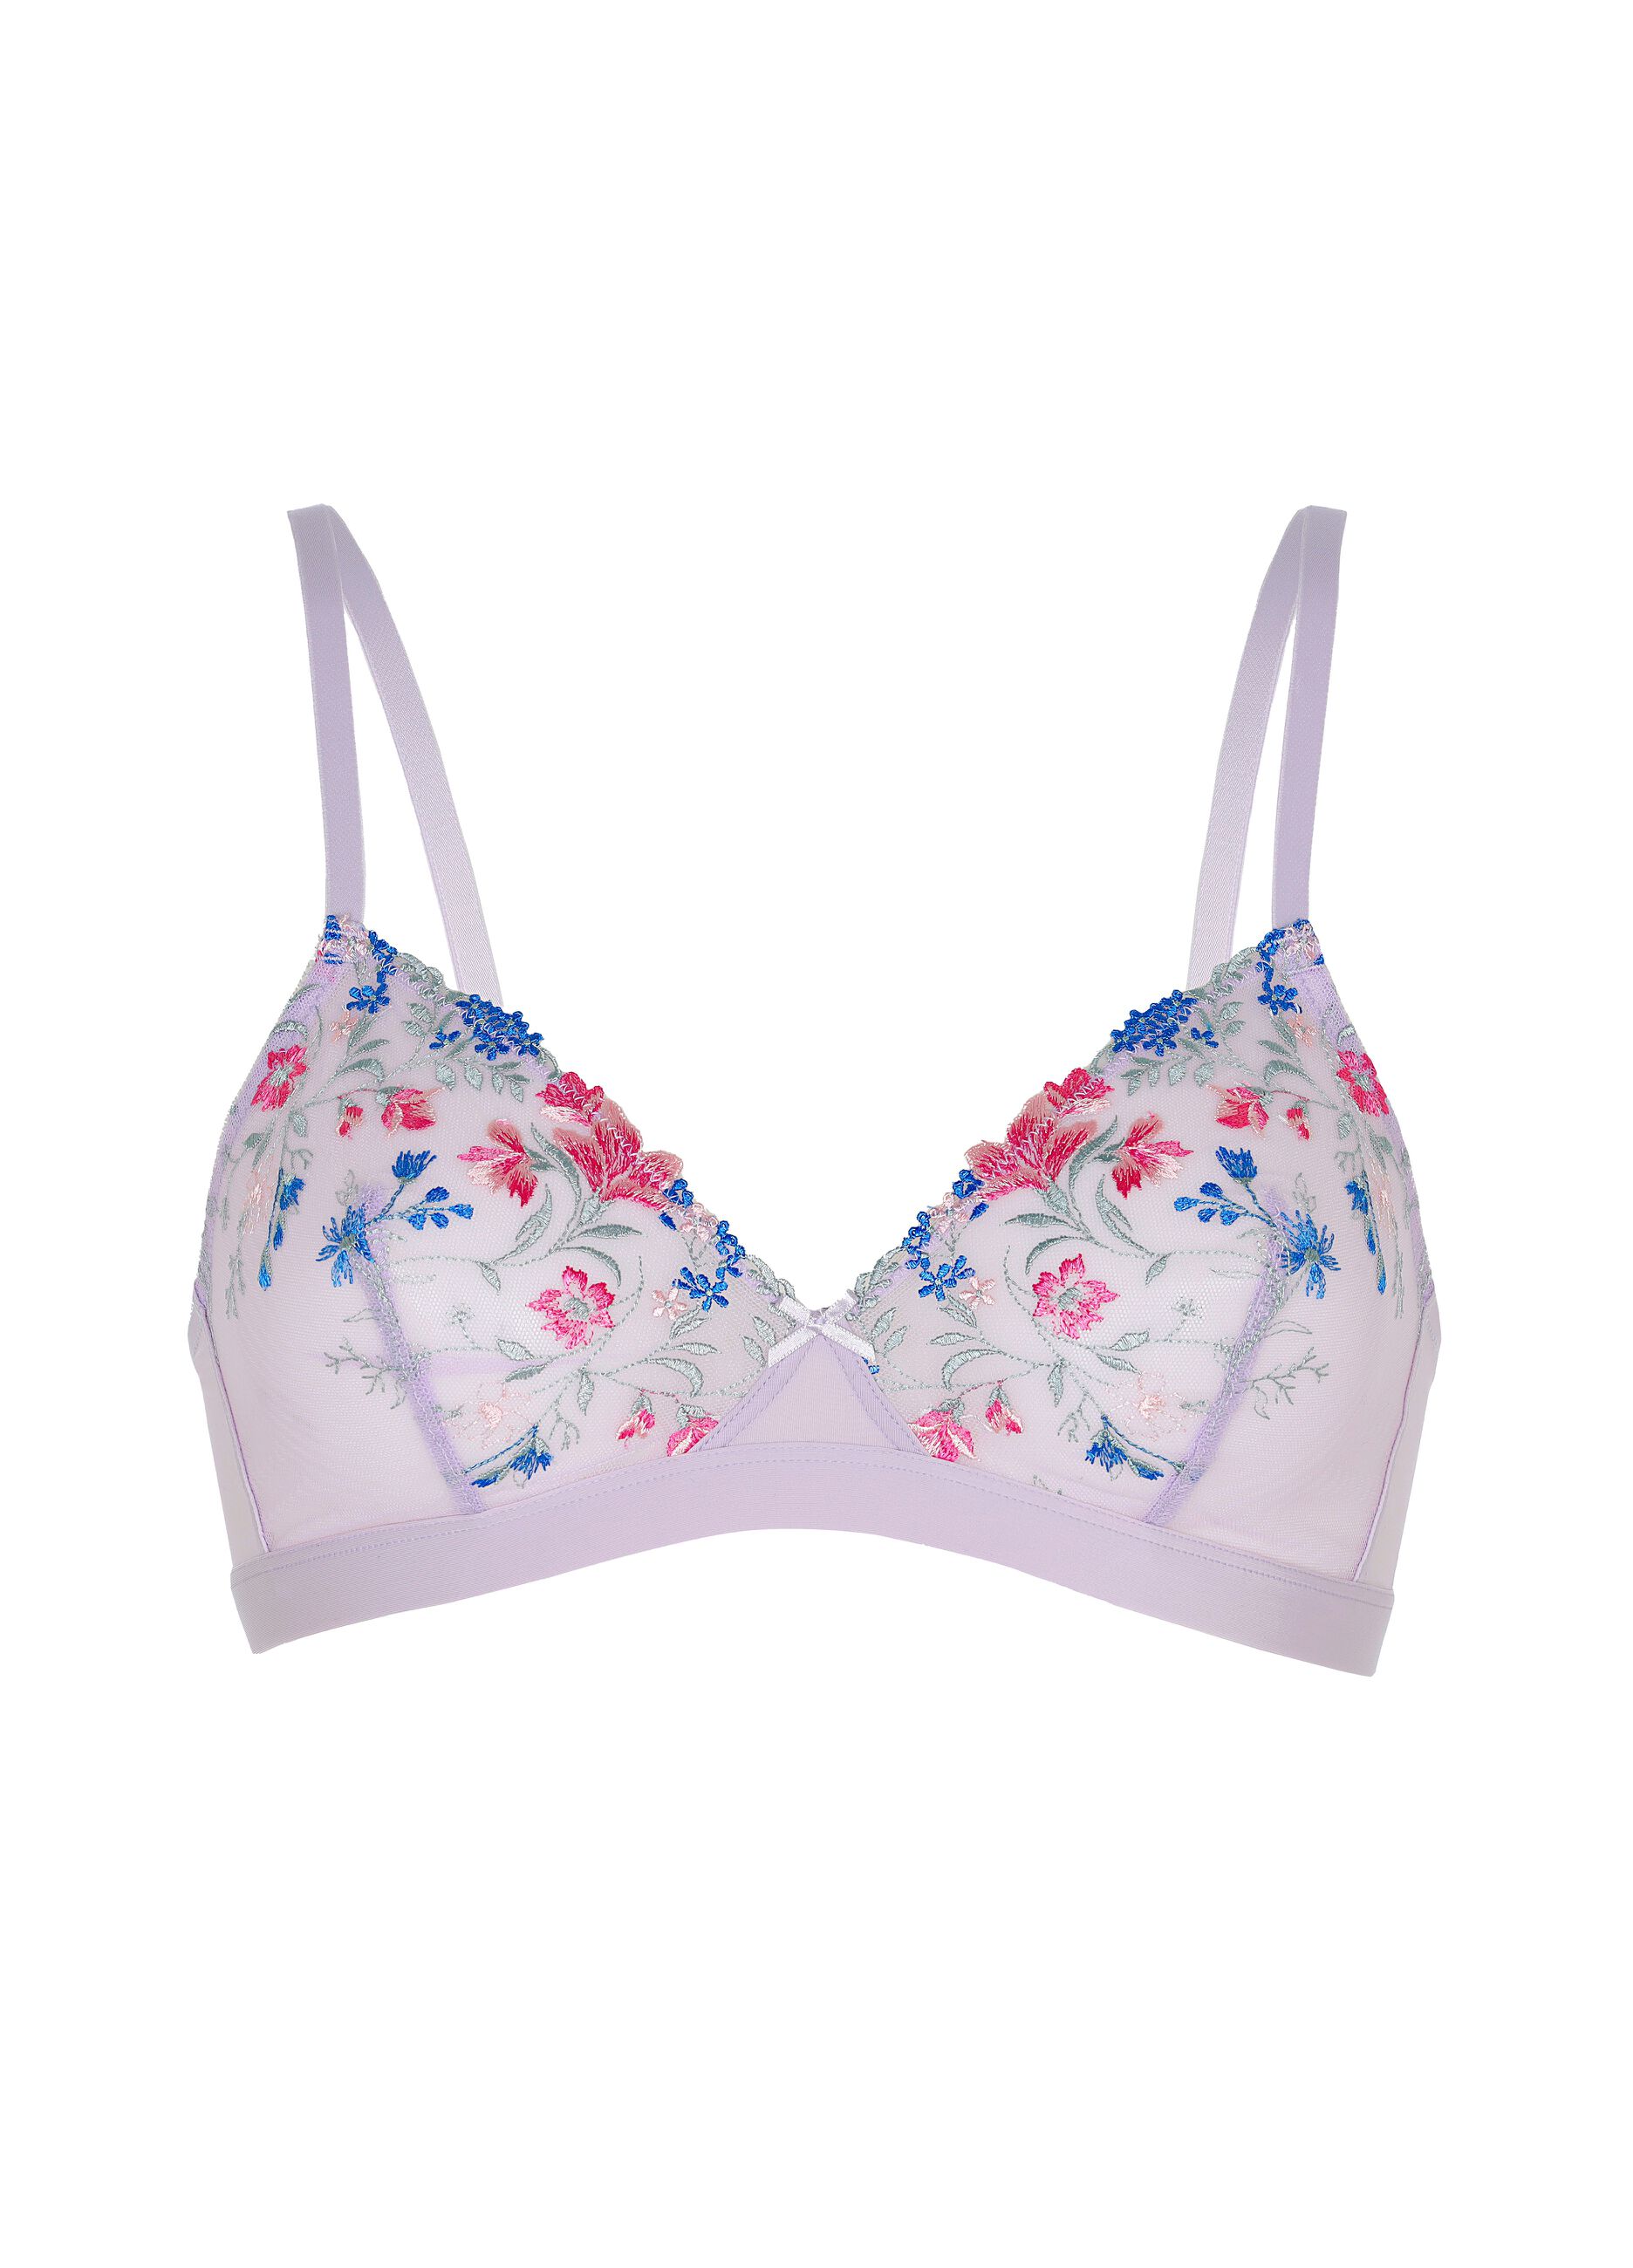 Embroidery Lace bra without underwiring